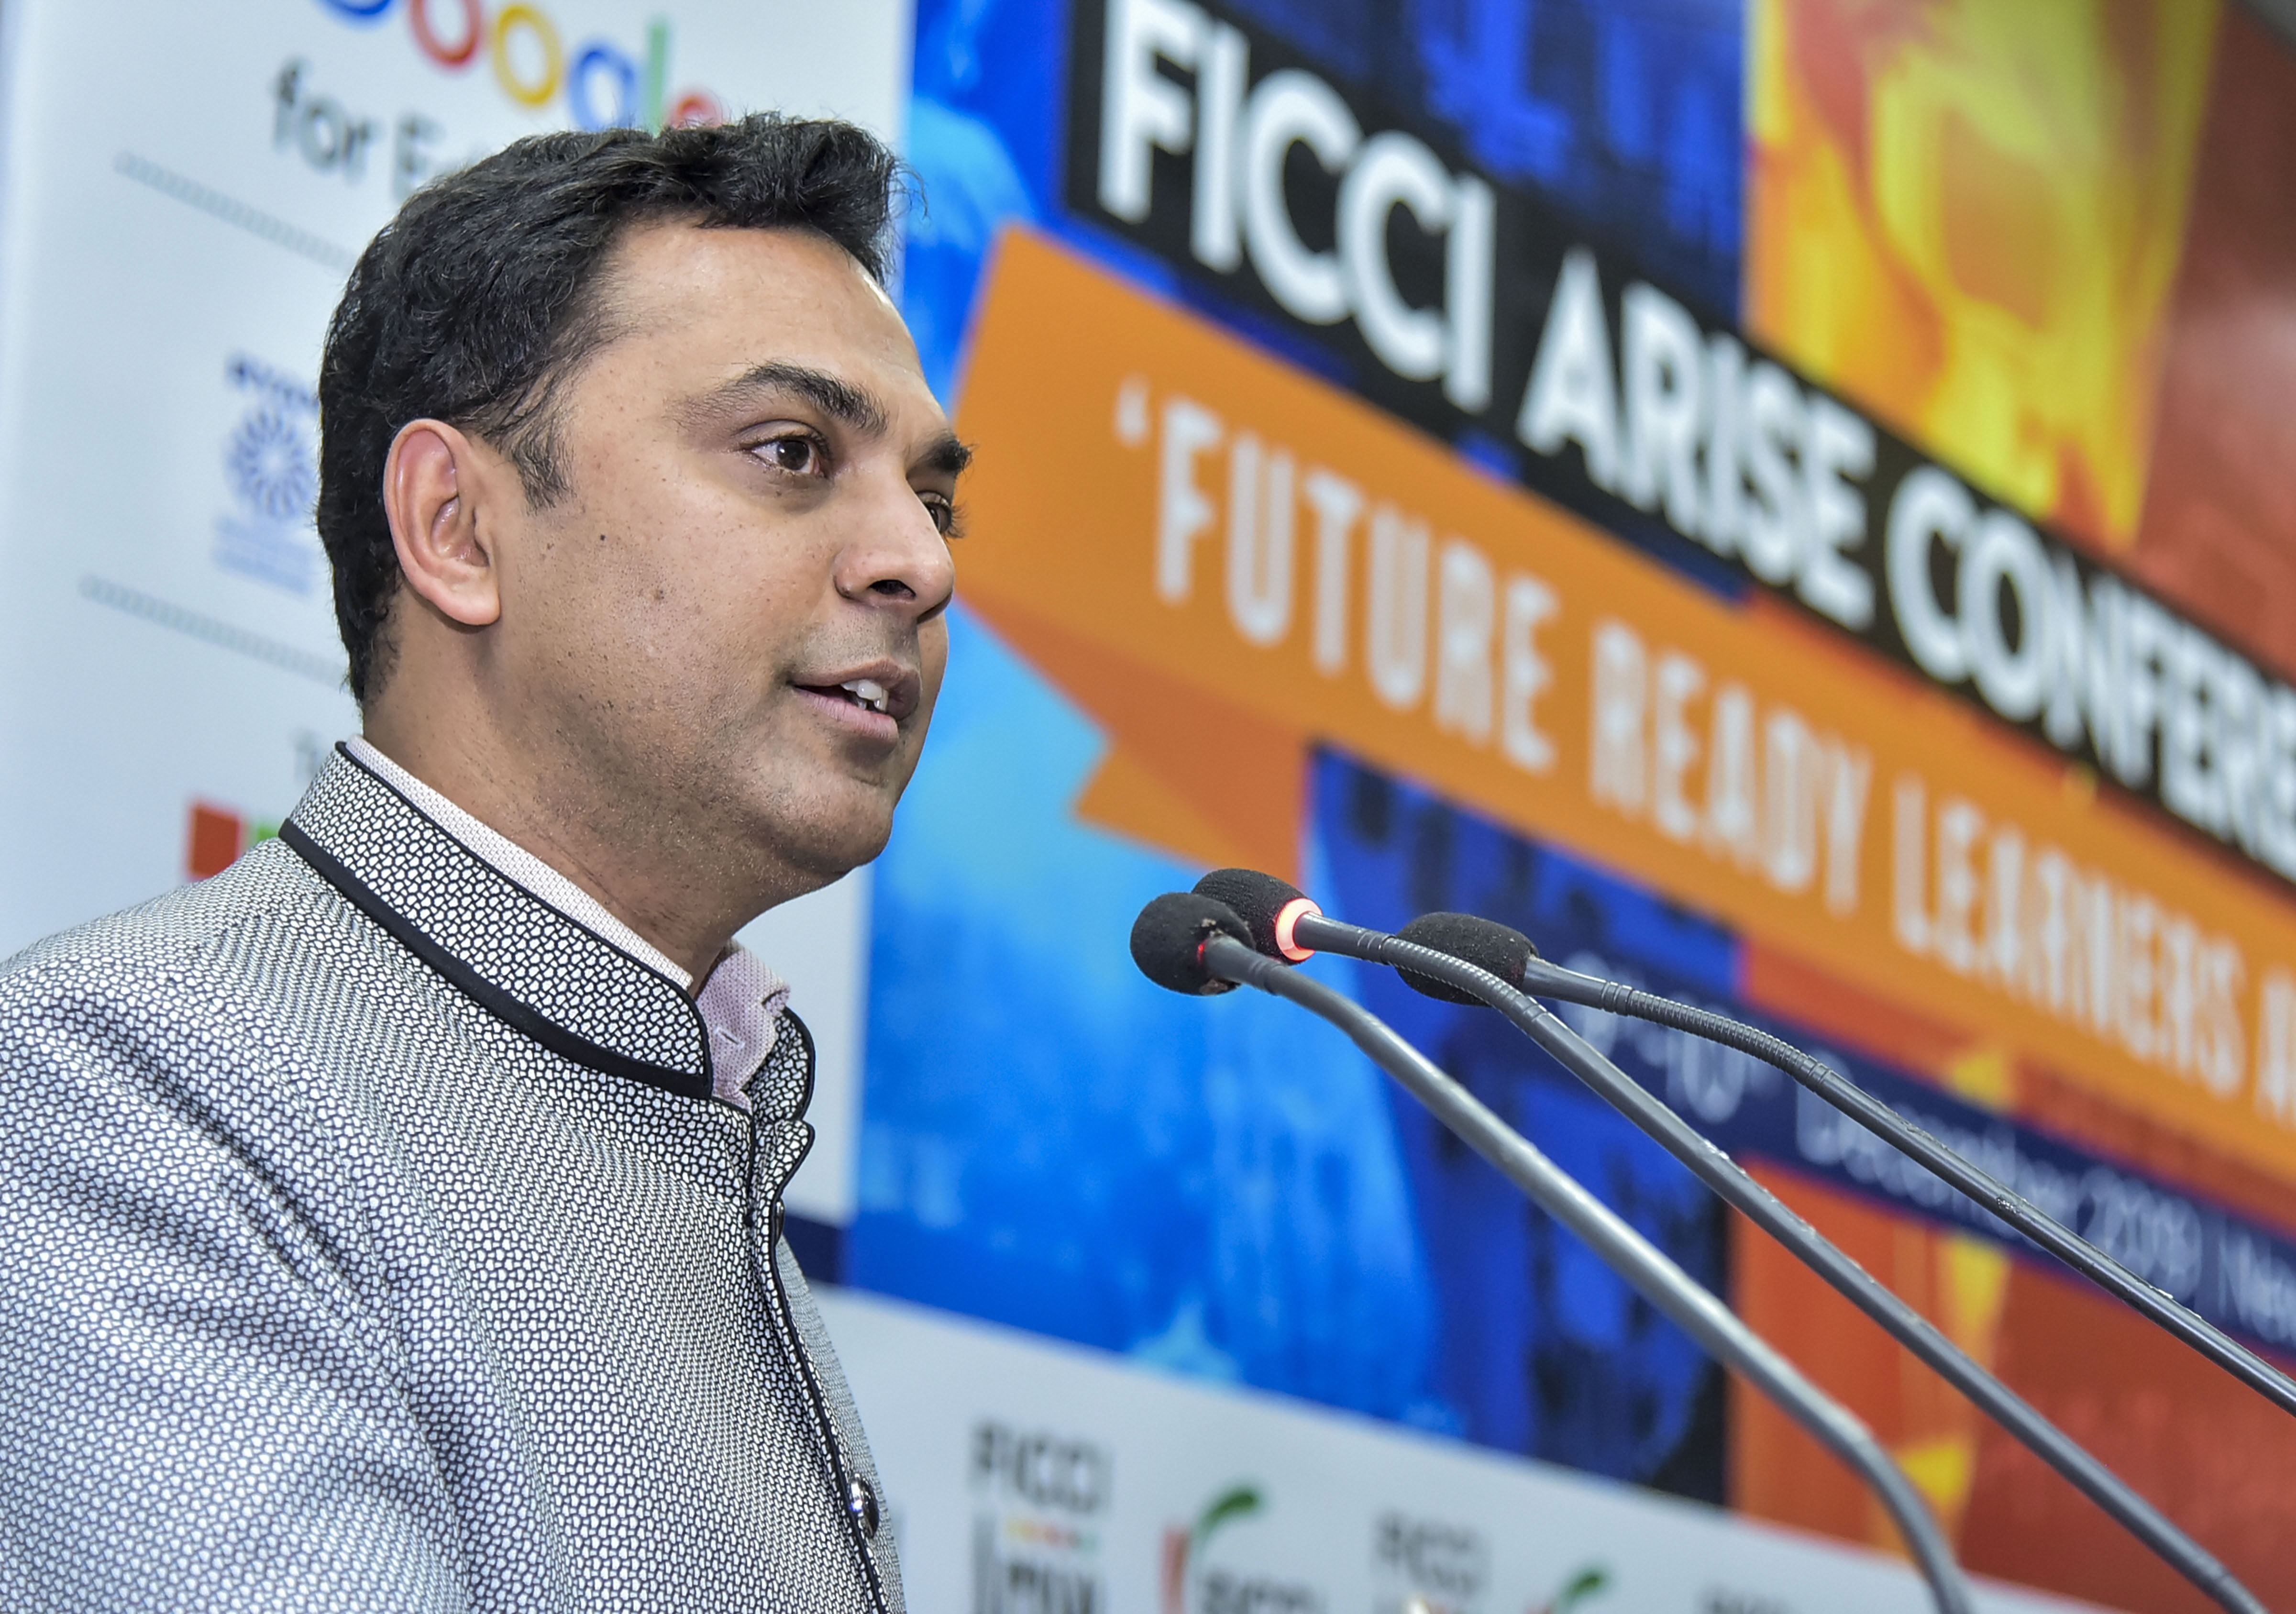 Chief economic adviser Krishnamurthy Subramanian (in picture) said as much as Rs 4.47 lakh crore has been sanctioned to non-banking financial institutions and housing finance companies to support retail lending